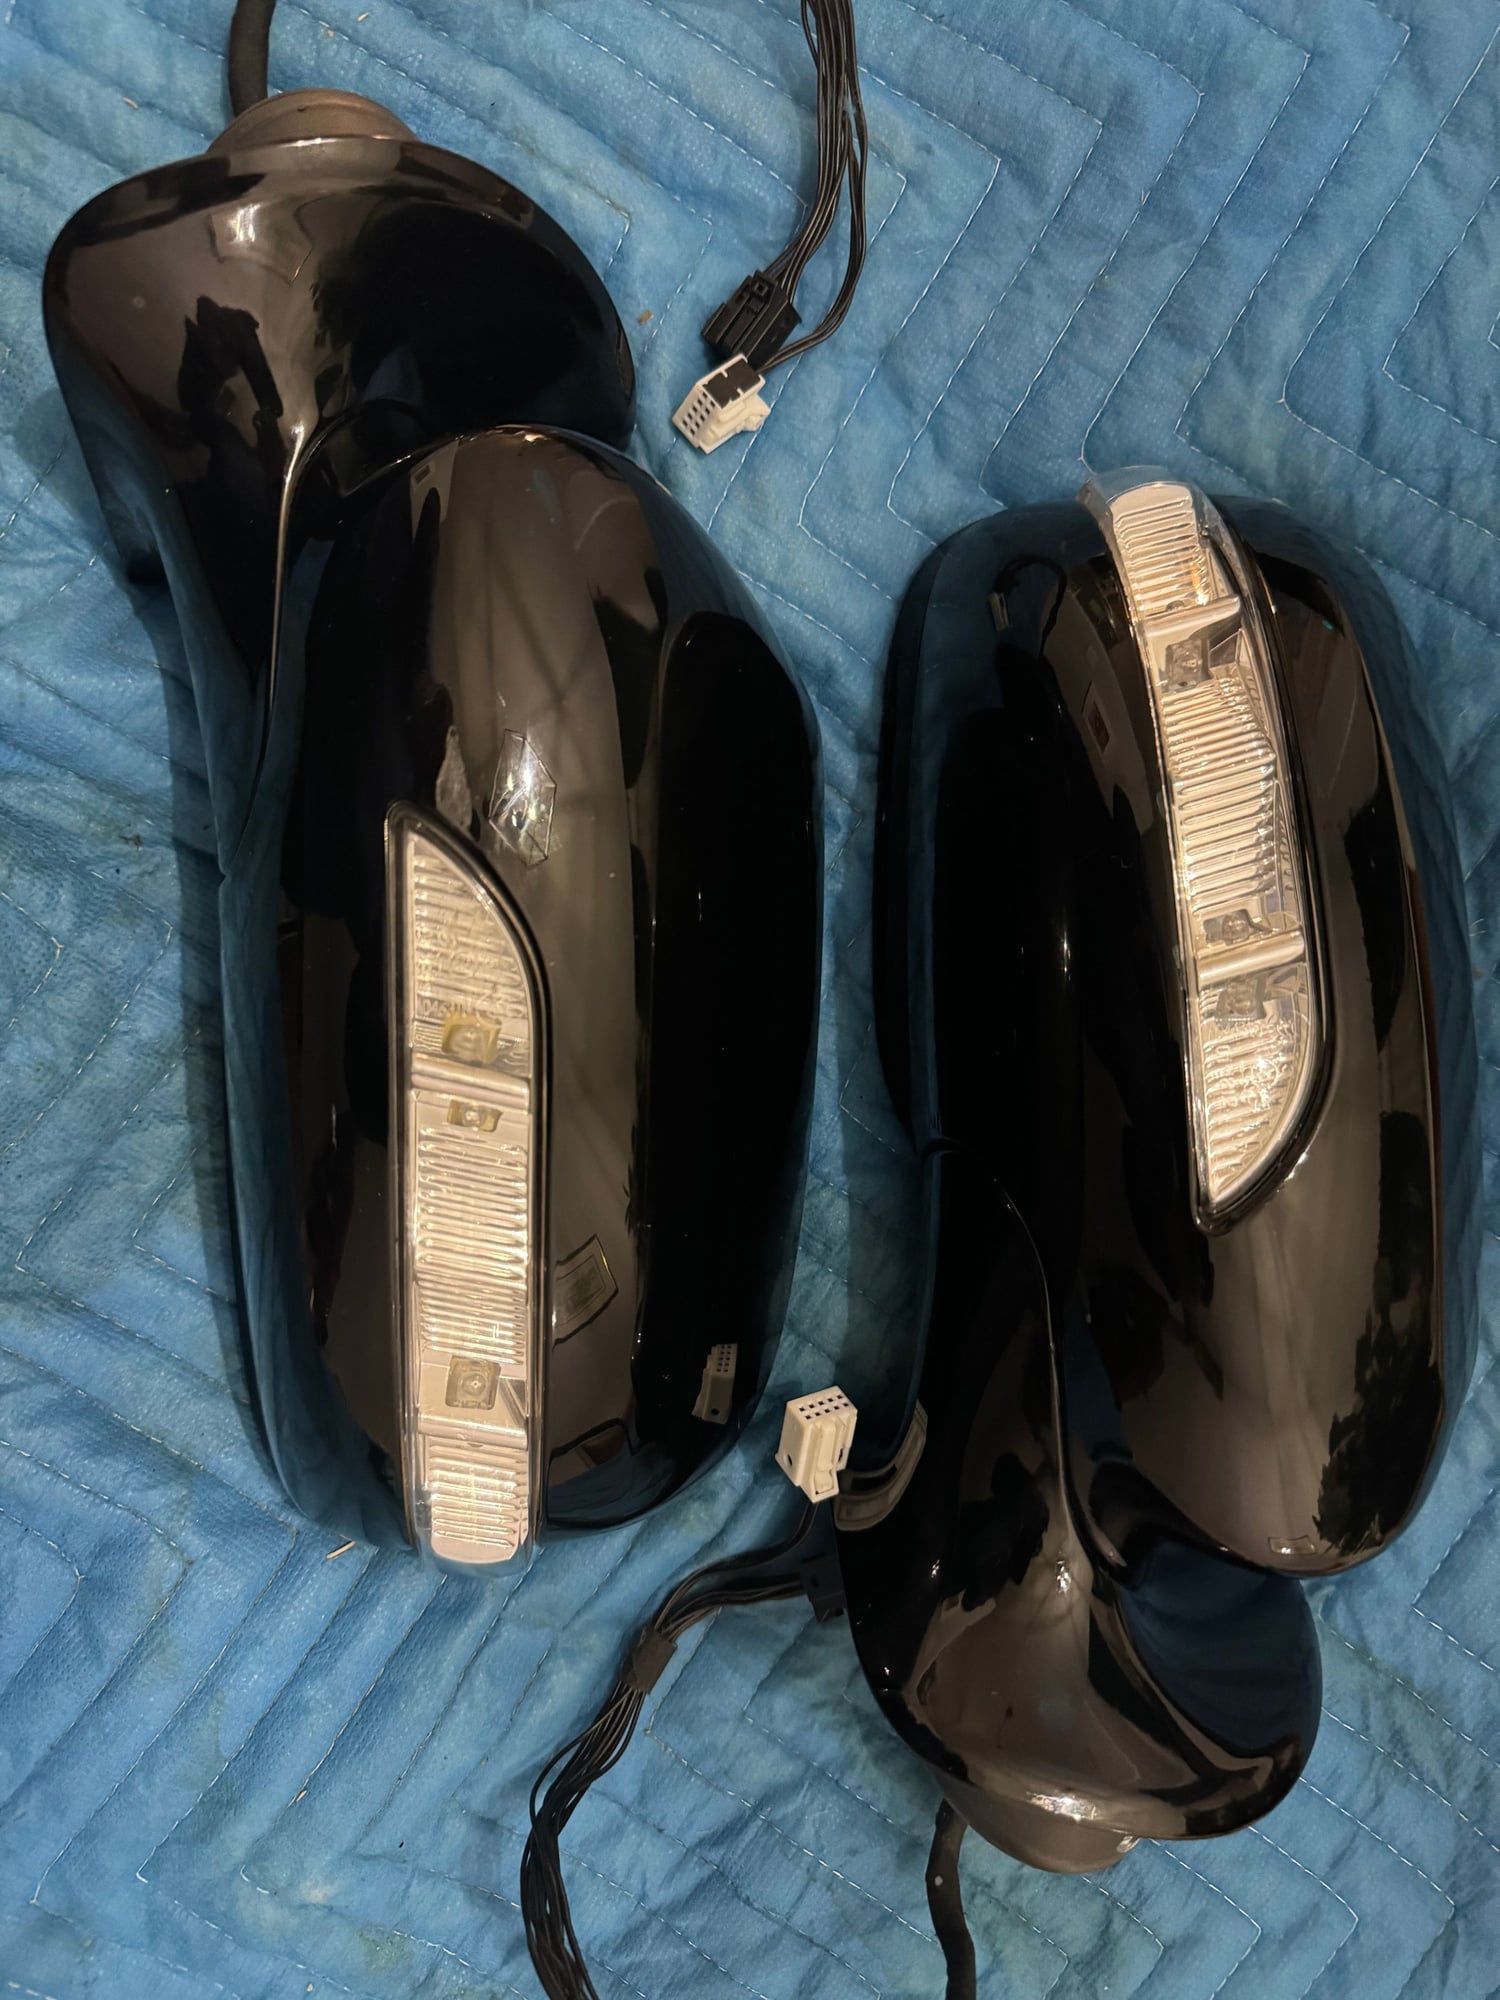 2005 Mercedes-Benz E55 AMG - Pair of 07-09 Mercedes W211 E63 E550 Right/Left Side View Door Mirrors - Accessories - $200 - Cleveland, OH 44116, United States